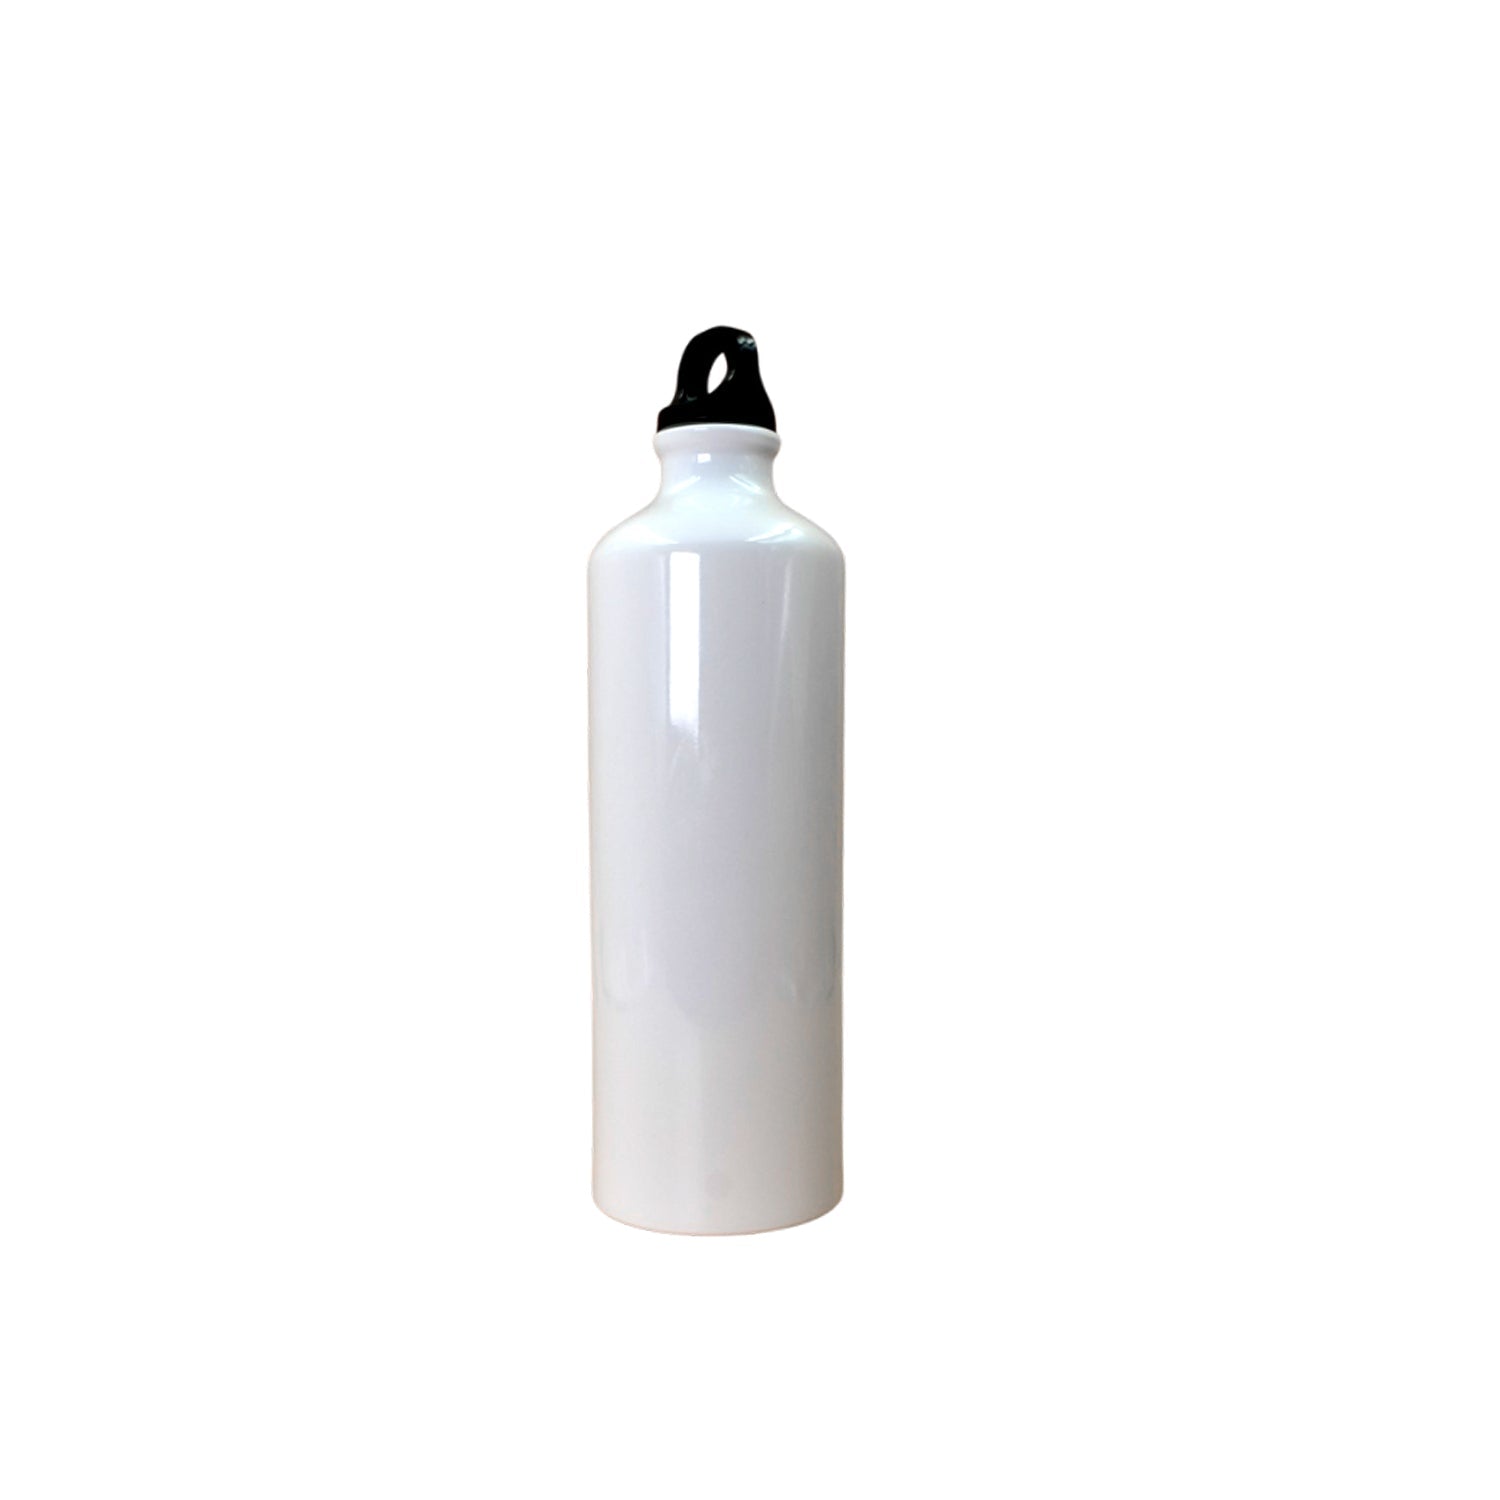 6083 CNB Bottle 2 used in all kinds of places like household and official for storing and drinking water and some beverages etc. freeshipping - DeoDap